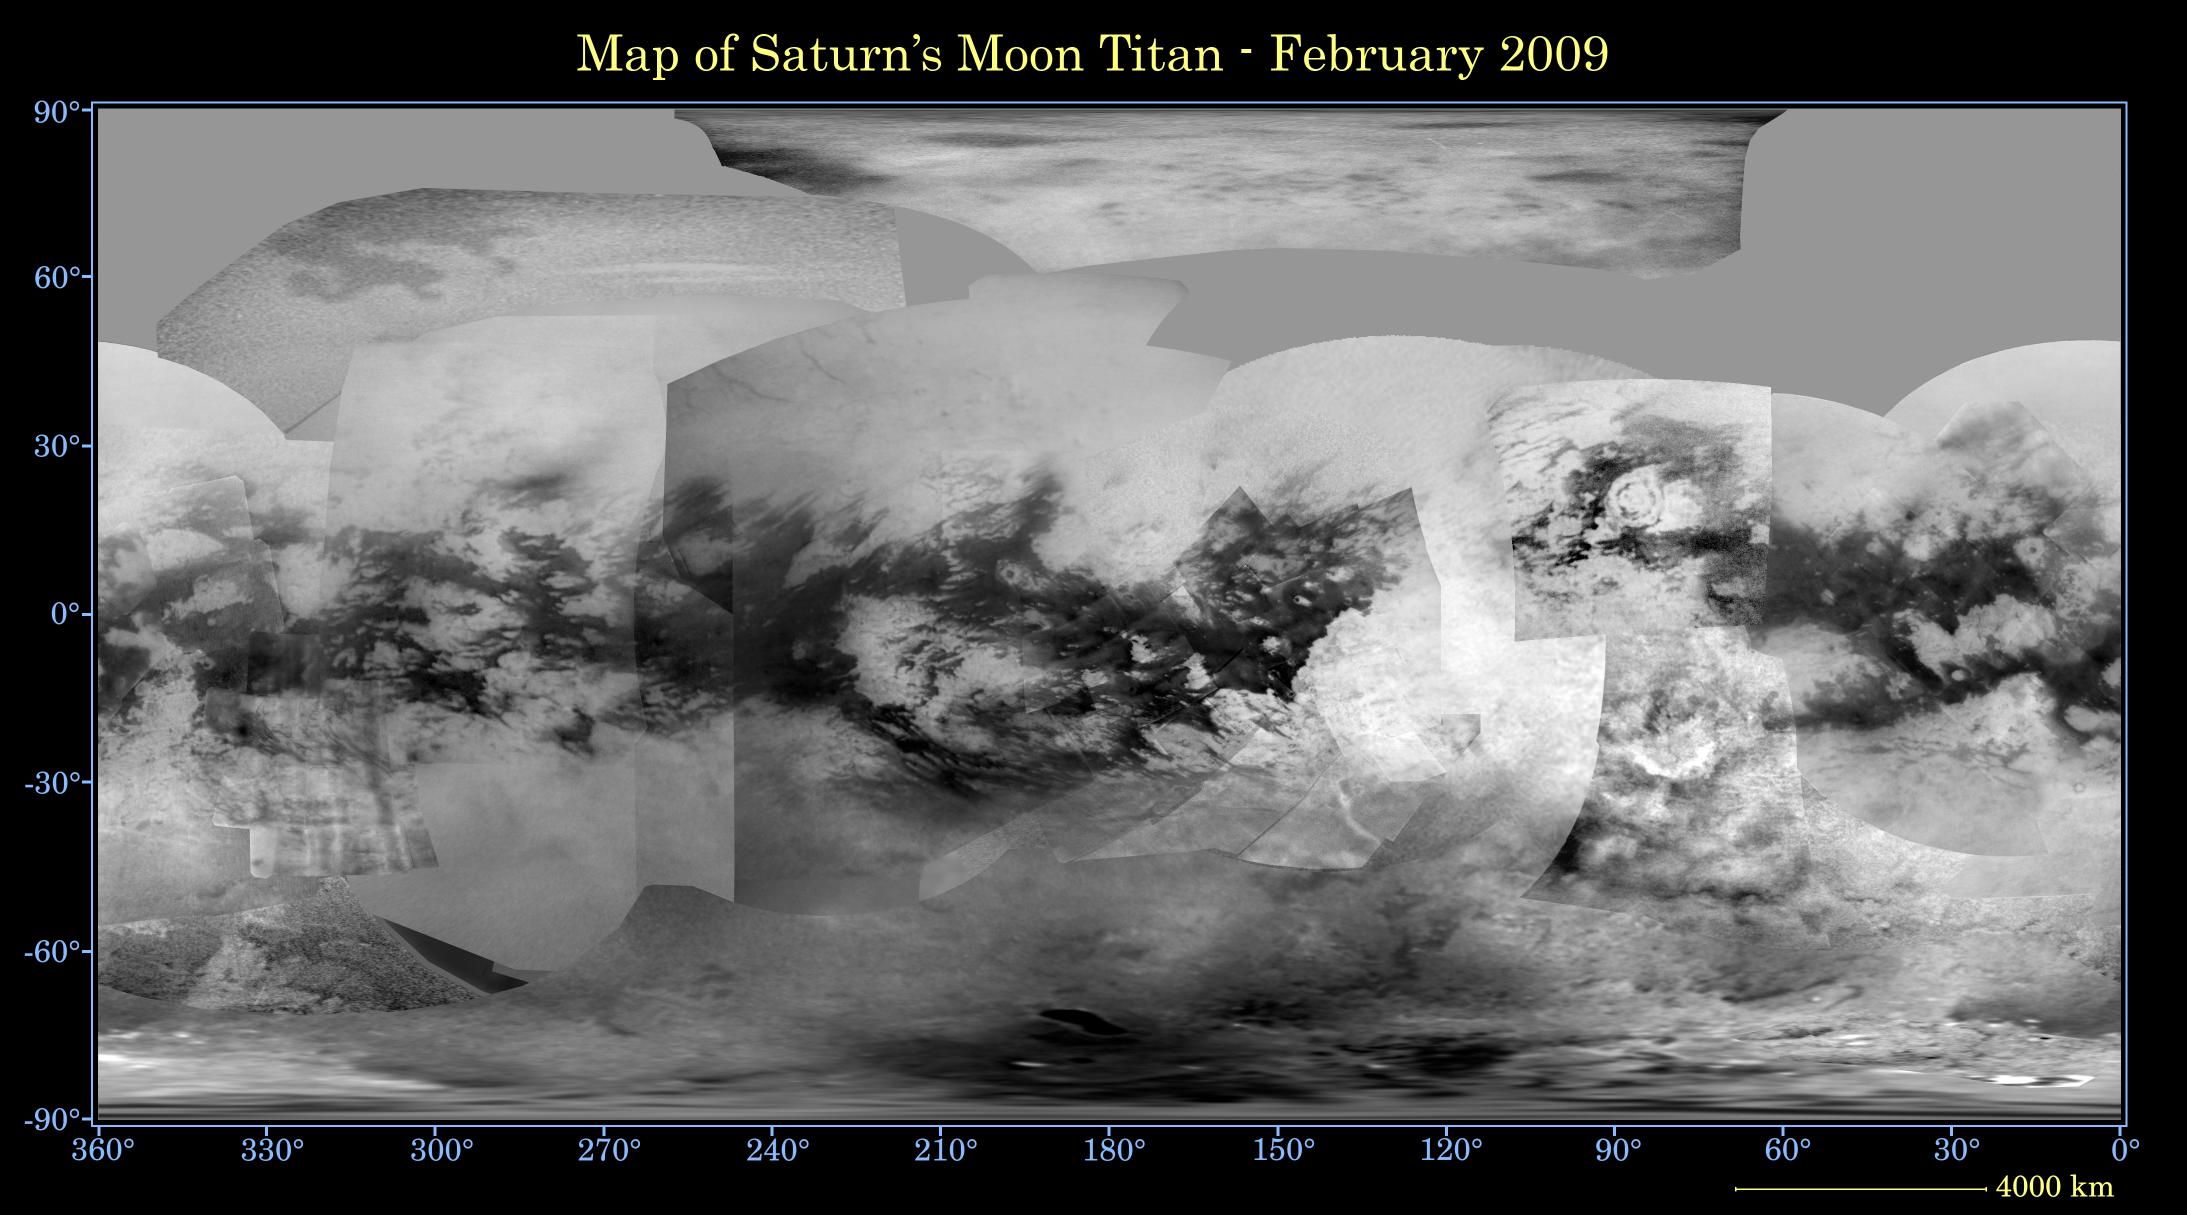 This global digital map of Saturn's moon Titan was created using images taken by the Cassini spacecraft's imaging science subsystem.